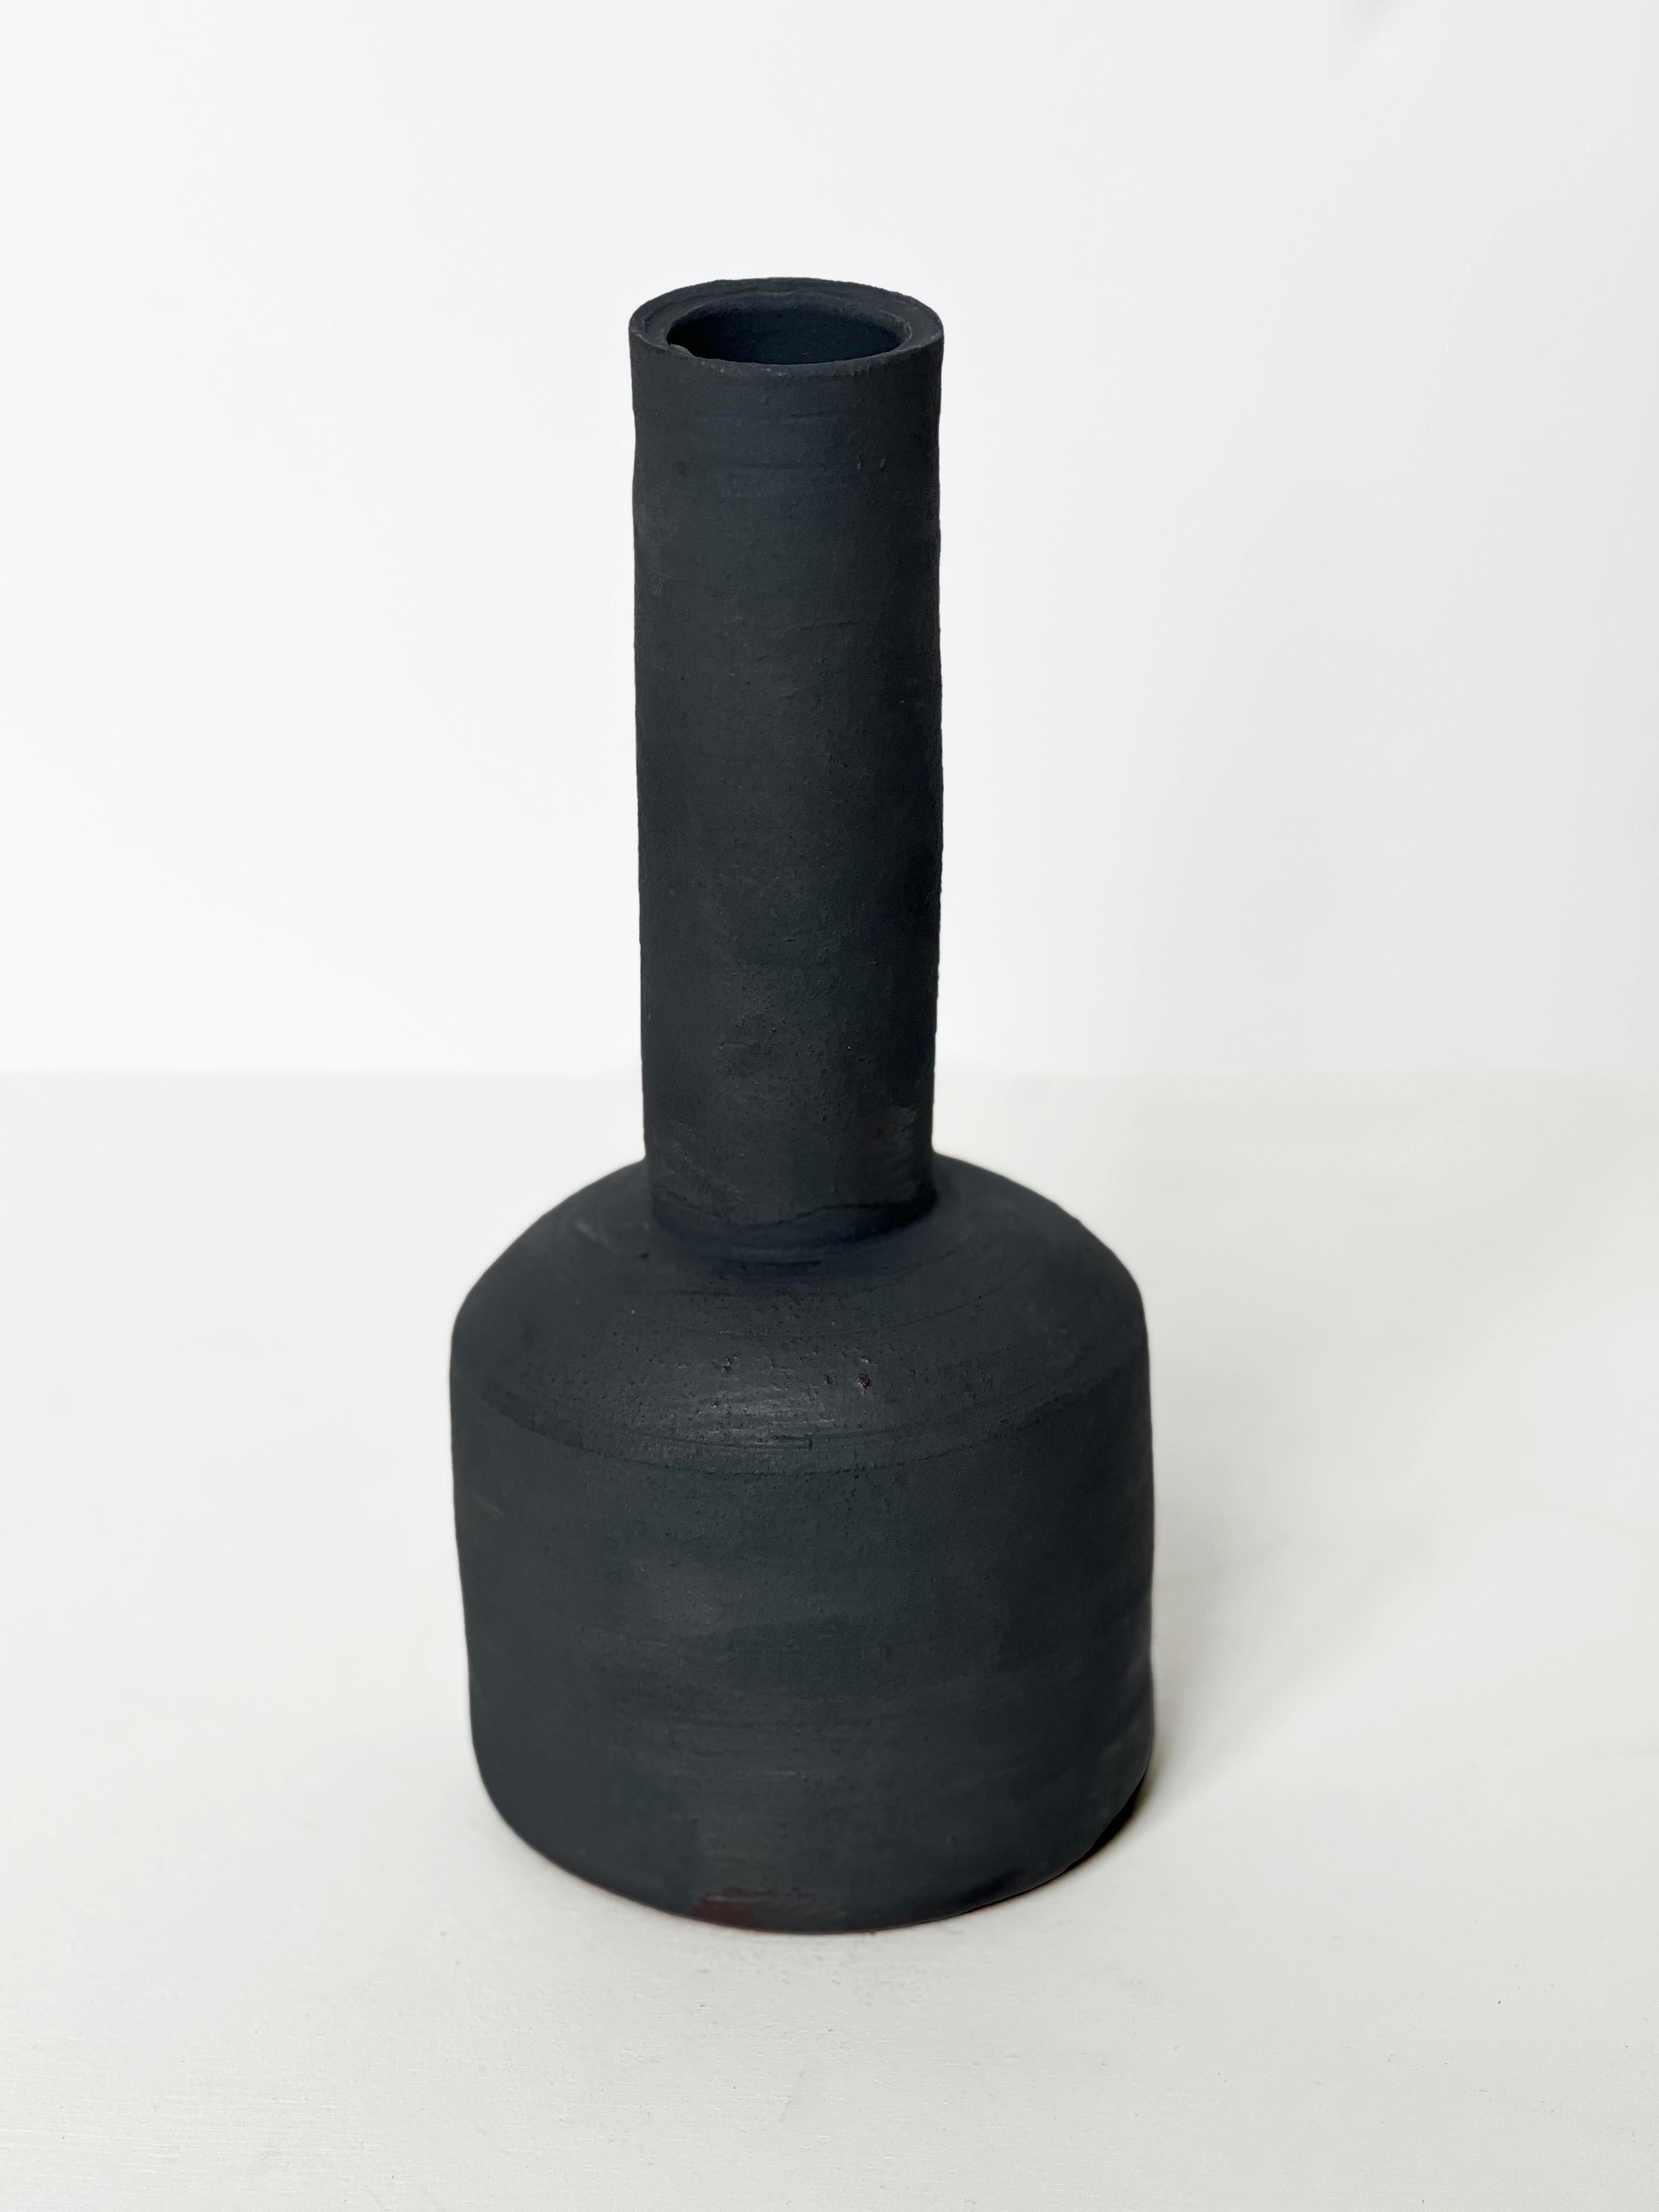 Handmade and carefully crafted stoneware piece in a dark gray/black color.  This vase features a wider circular bottom and a long neck.  With a matte finish and smooth feel, this vase is perfect for accenting any room and can be functional or